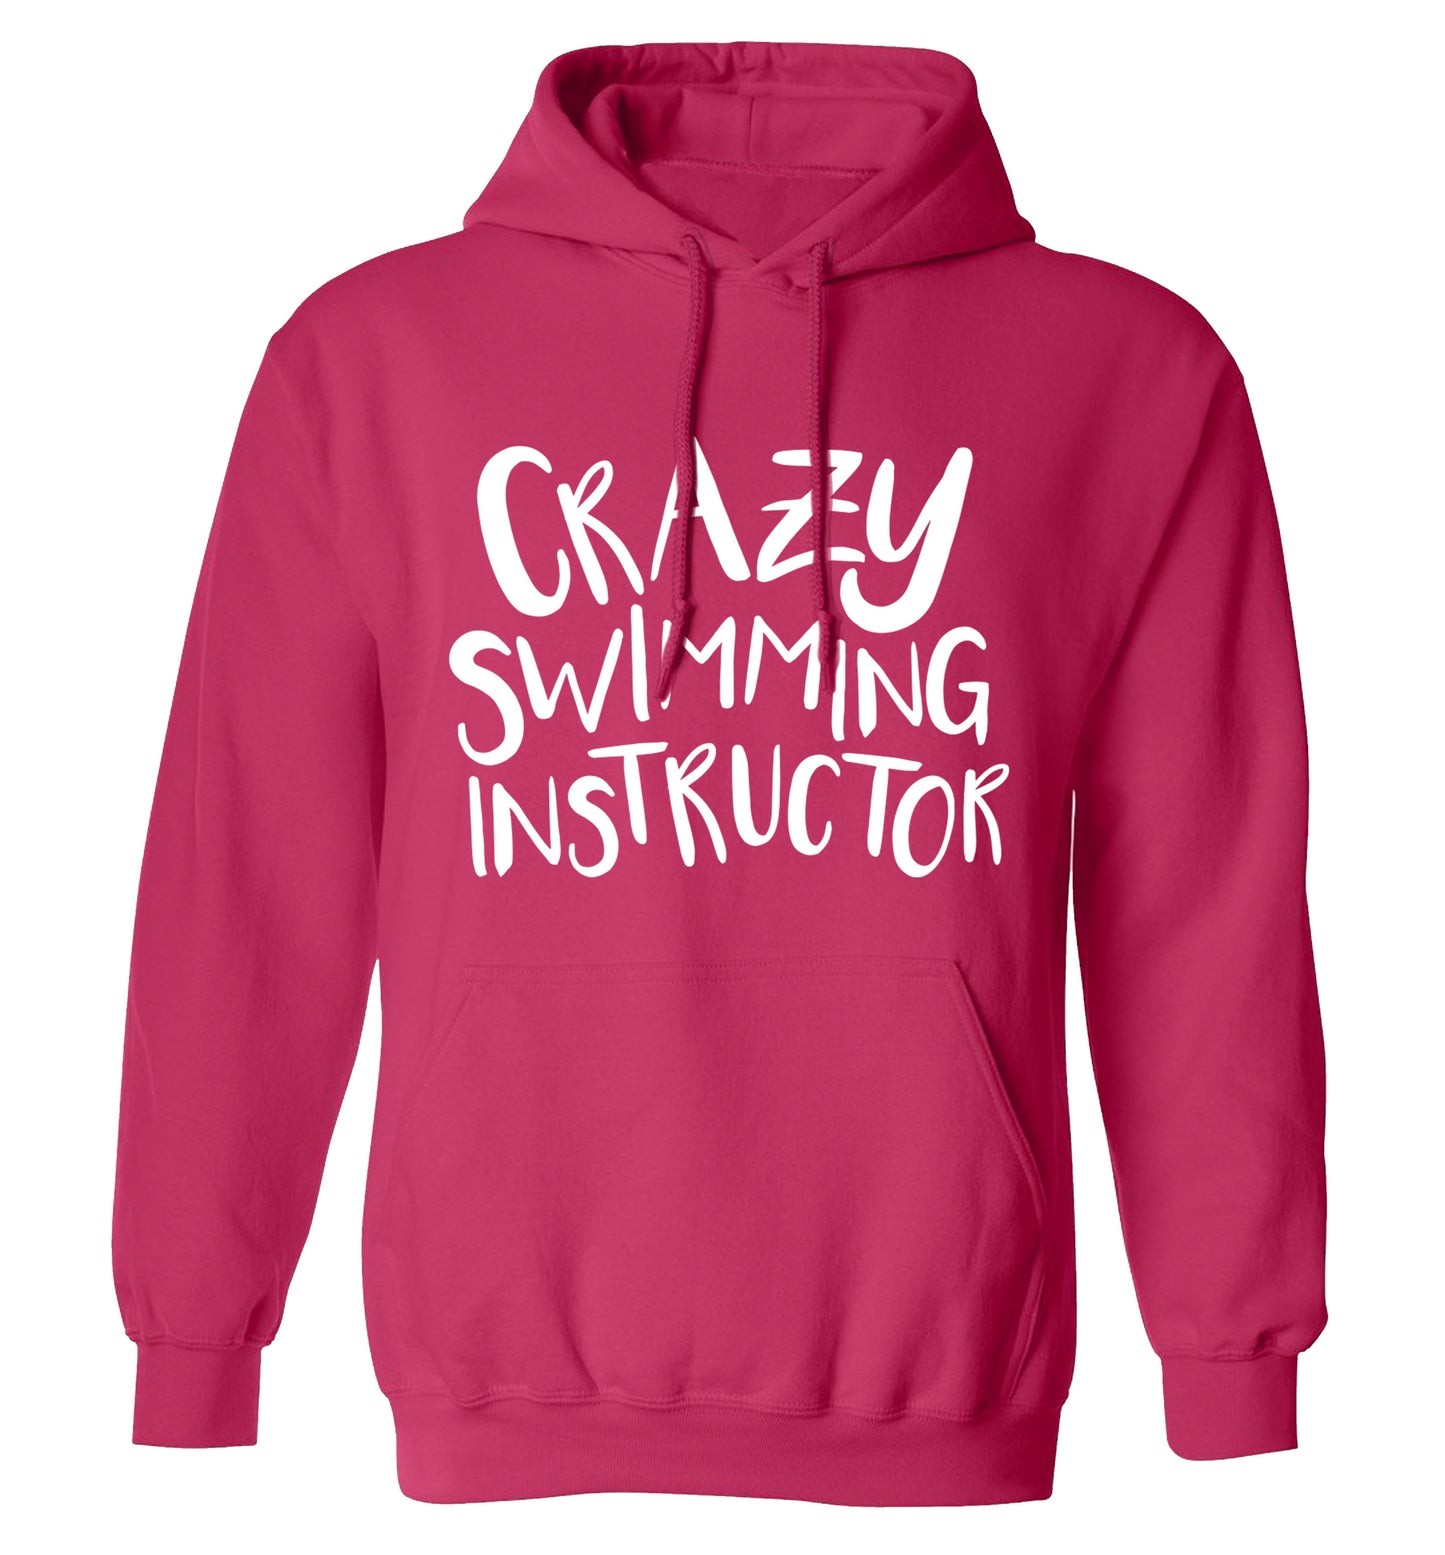 Crazy swimming instructor adults unisex pink hoodie 2XL